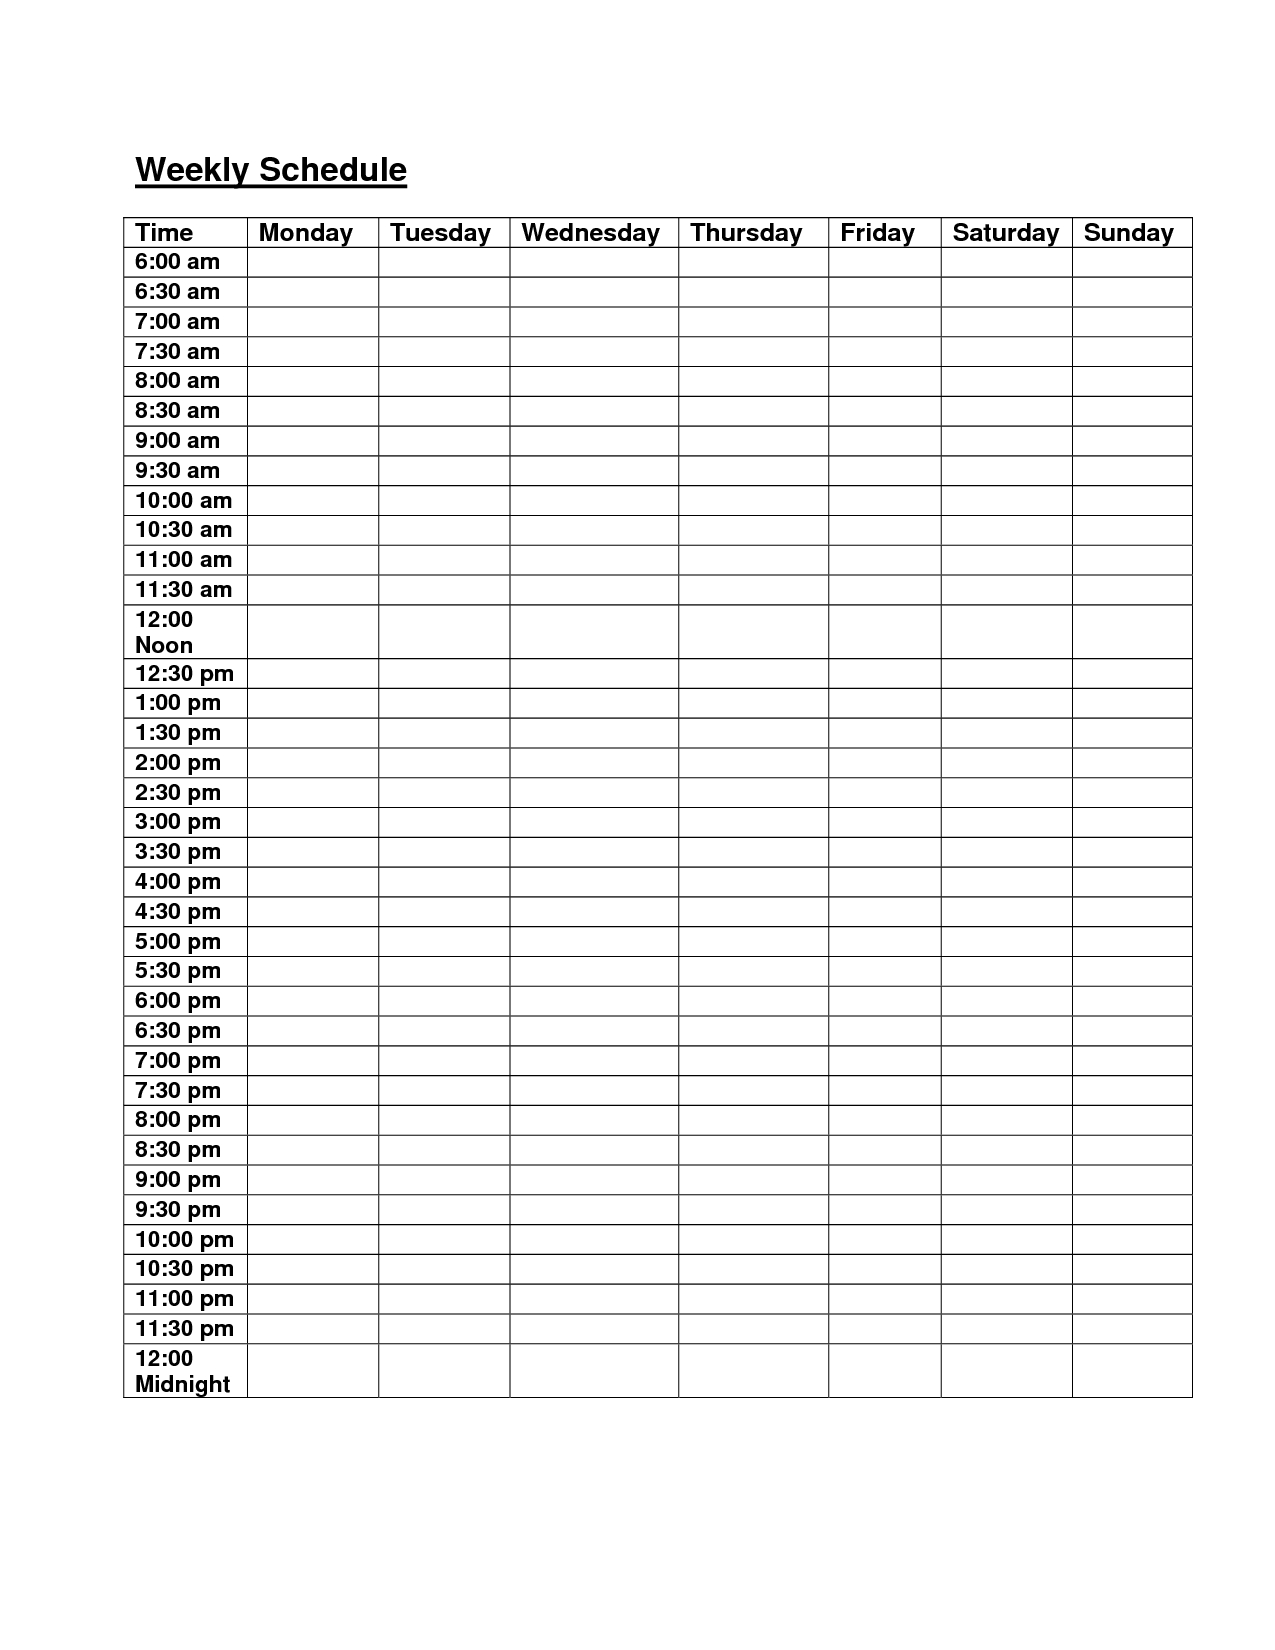 Blank Weekly Calendar Monday Through Friday | Daily Schedule within Hourly Weekly Schedule Pdf